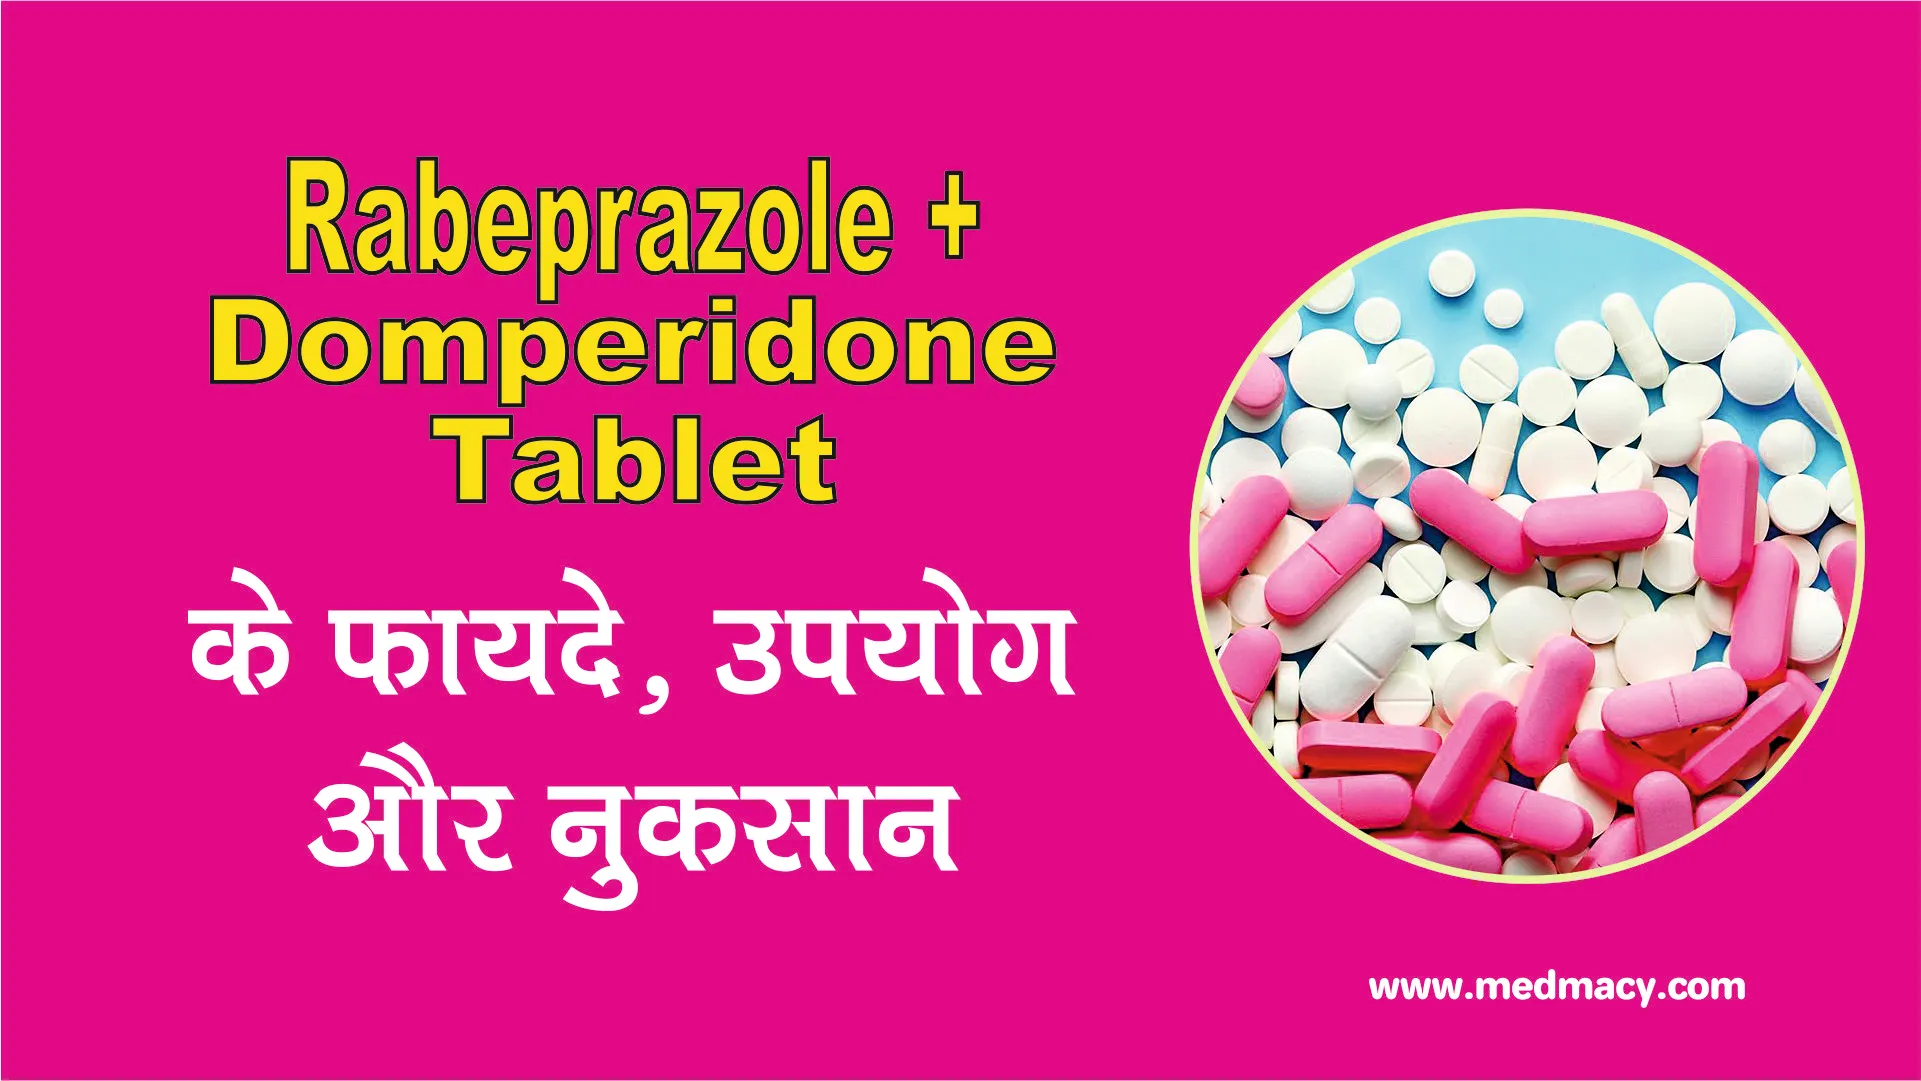 Rabeprazole and Domperidone Tablet Uses in Hindi